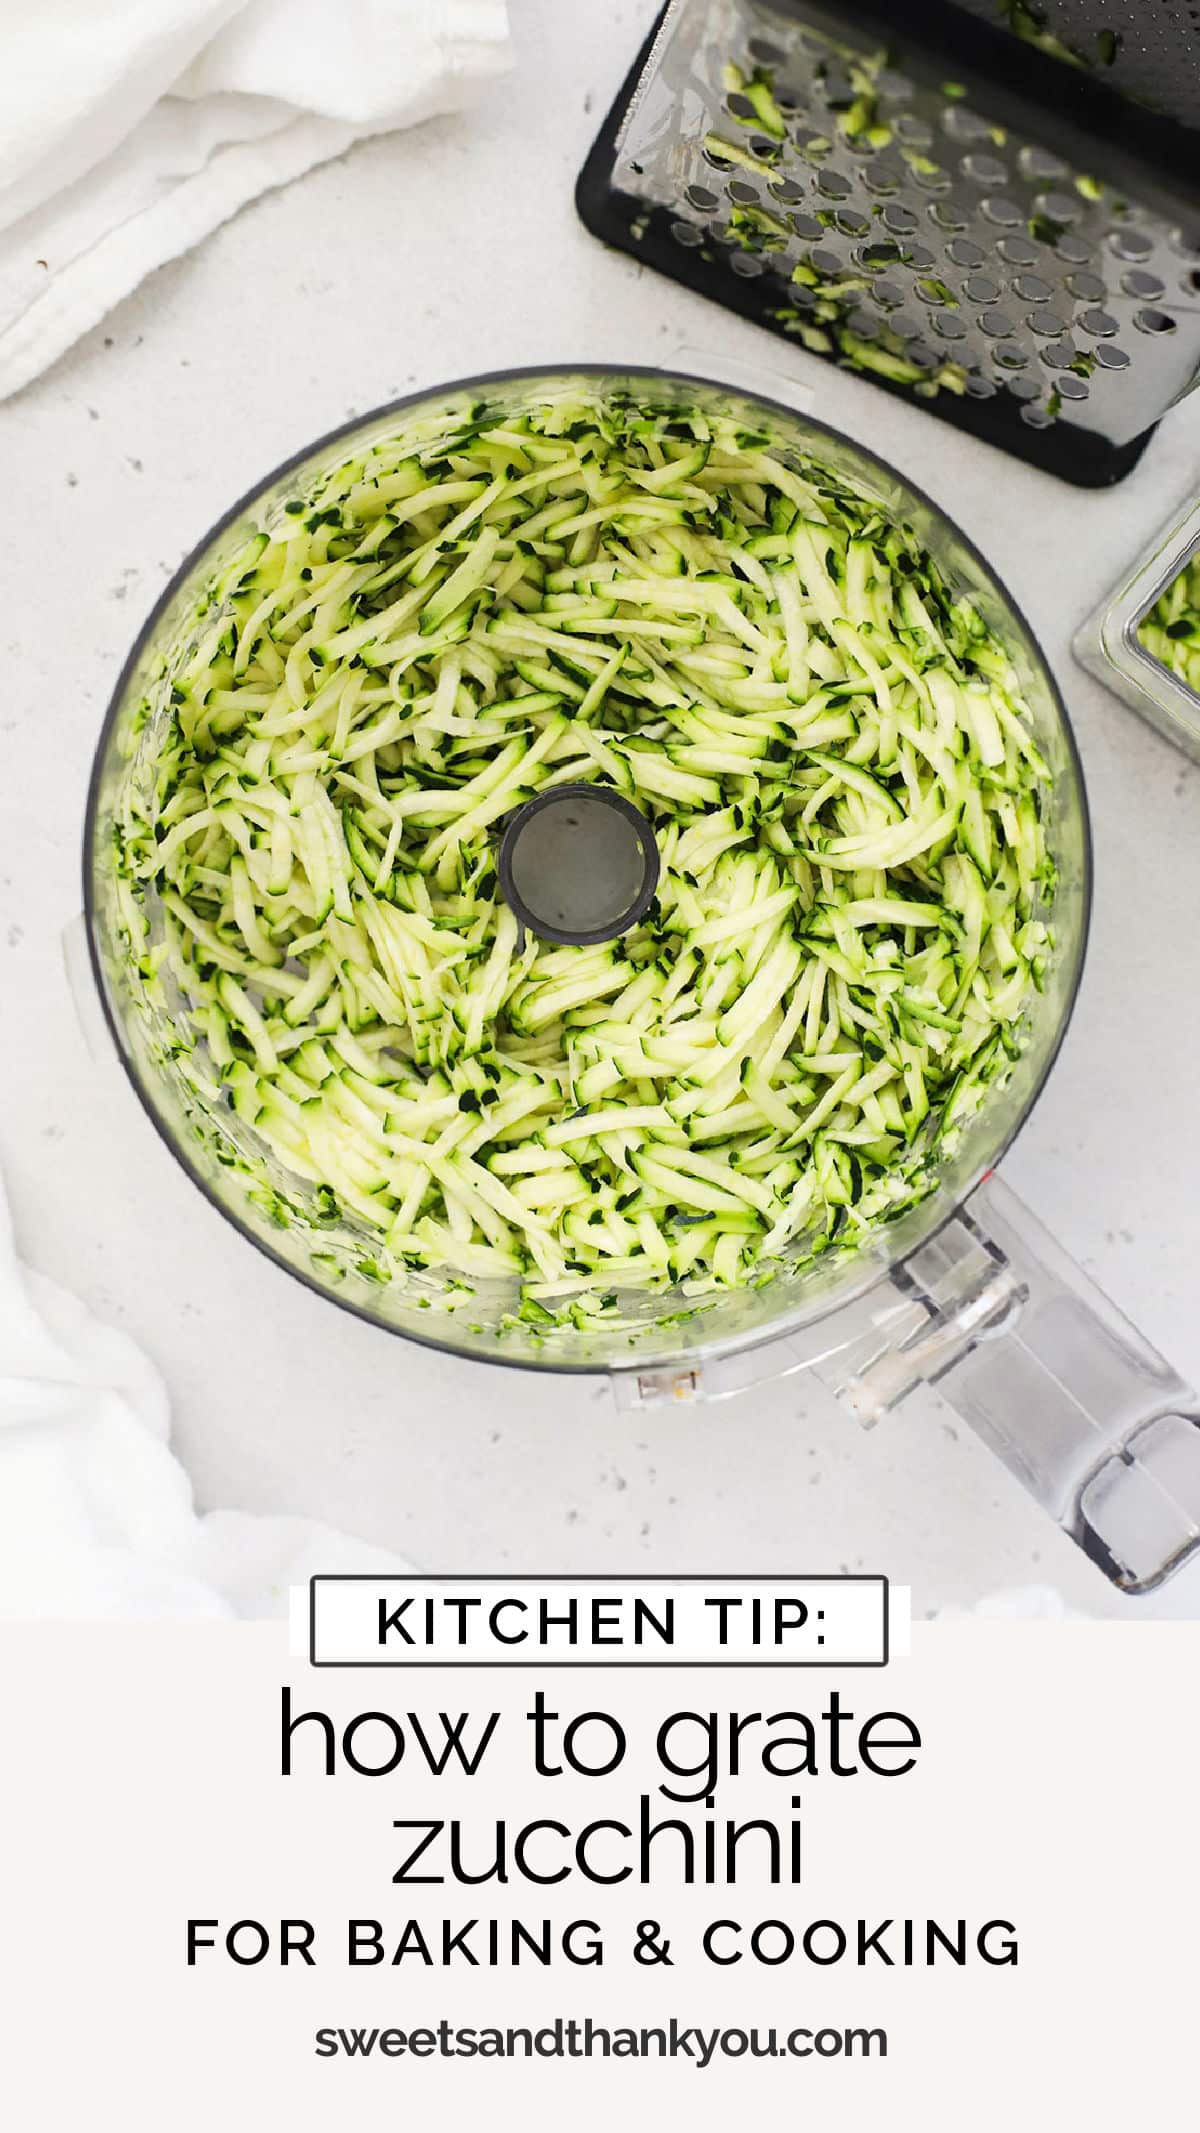 Learn how to grate zucchini for baking zucchini bread & cake, making meatballs & more with this easy tutorial. (+10 zucchini recipes to try!) / grated zucchini recipes / how to shred zucchini for baking / how to squeeze excess liquid out of zucchini / how to grate zucchini without a food processor / how to shred zucchini with a box grater / how to grate zucchini for zucchini bread / gluten free zucchini recipes